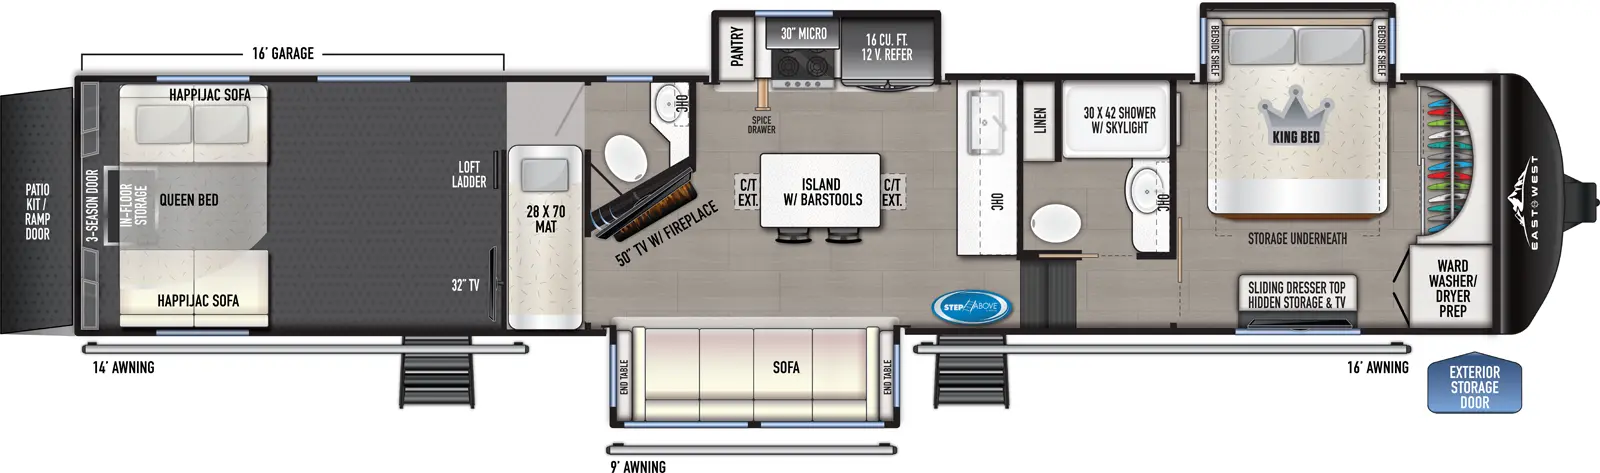 The 400TH has three slideouts, two entries, and a rear ramp door. Exterior features 10 foot, 9 foot, and 16 foot awnings, and a ramp door patio kit. Interior layout front to back: front wardrobe with washer/dryer prep, off-door side king bed slideout with shelves on each side, storage underneath, and door side dresser with hidden storage, and TV; off-door side full bathroom with linen closet; steps down to main living area and entry; kitchen counter with sink and overhead cabinet along inner wall; off-door side slideout with 12V refrigerator, cooktop, microwave, pantry, and spice drawer; kitchen island with barstools and countertop extensions; door side slideout with sofa and end tables on each side; angled TV with fireplace along inner wall; rear garage with half bathroom, loft with mat, TV, second entry, opposing happi-jac sofas with queen bed above, in-floor storage, and three season door for rear patio/ramp. Garage Dimensions: 11 foot from rear to main living area.